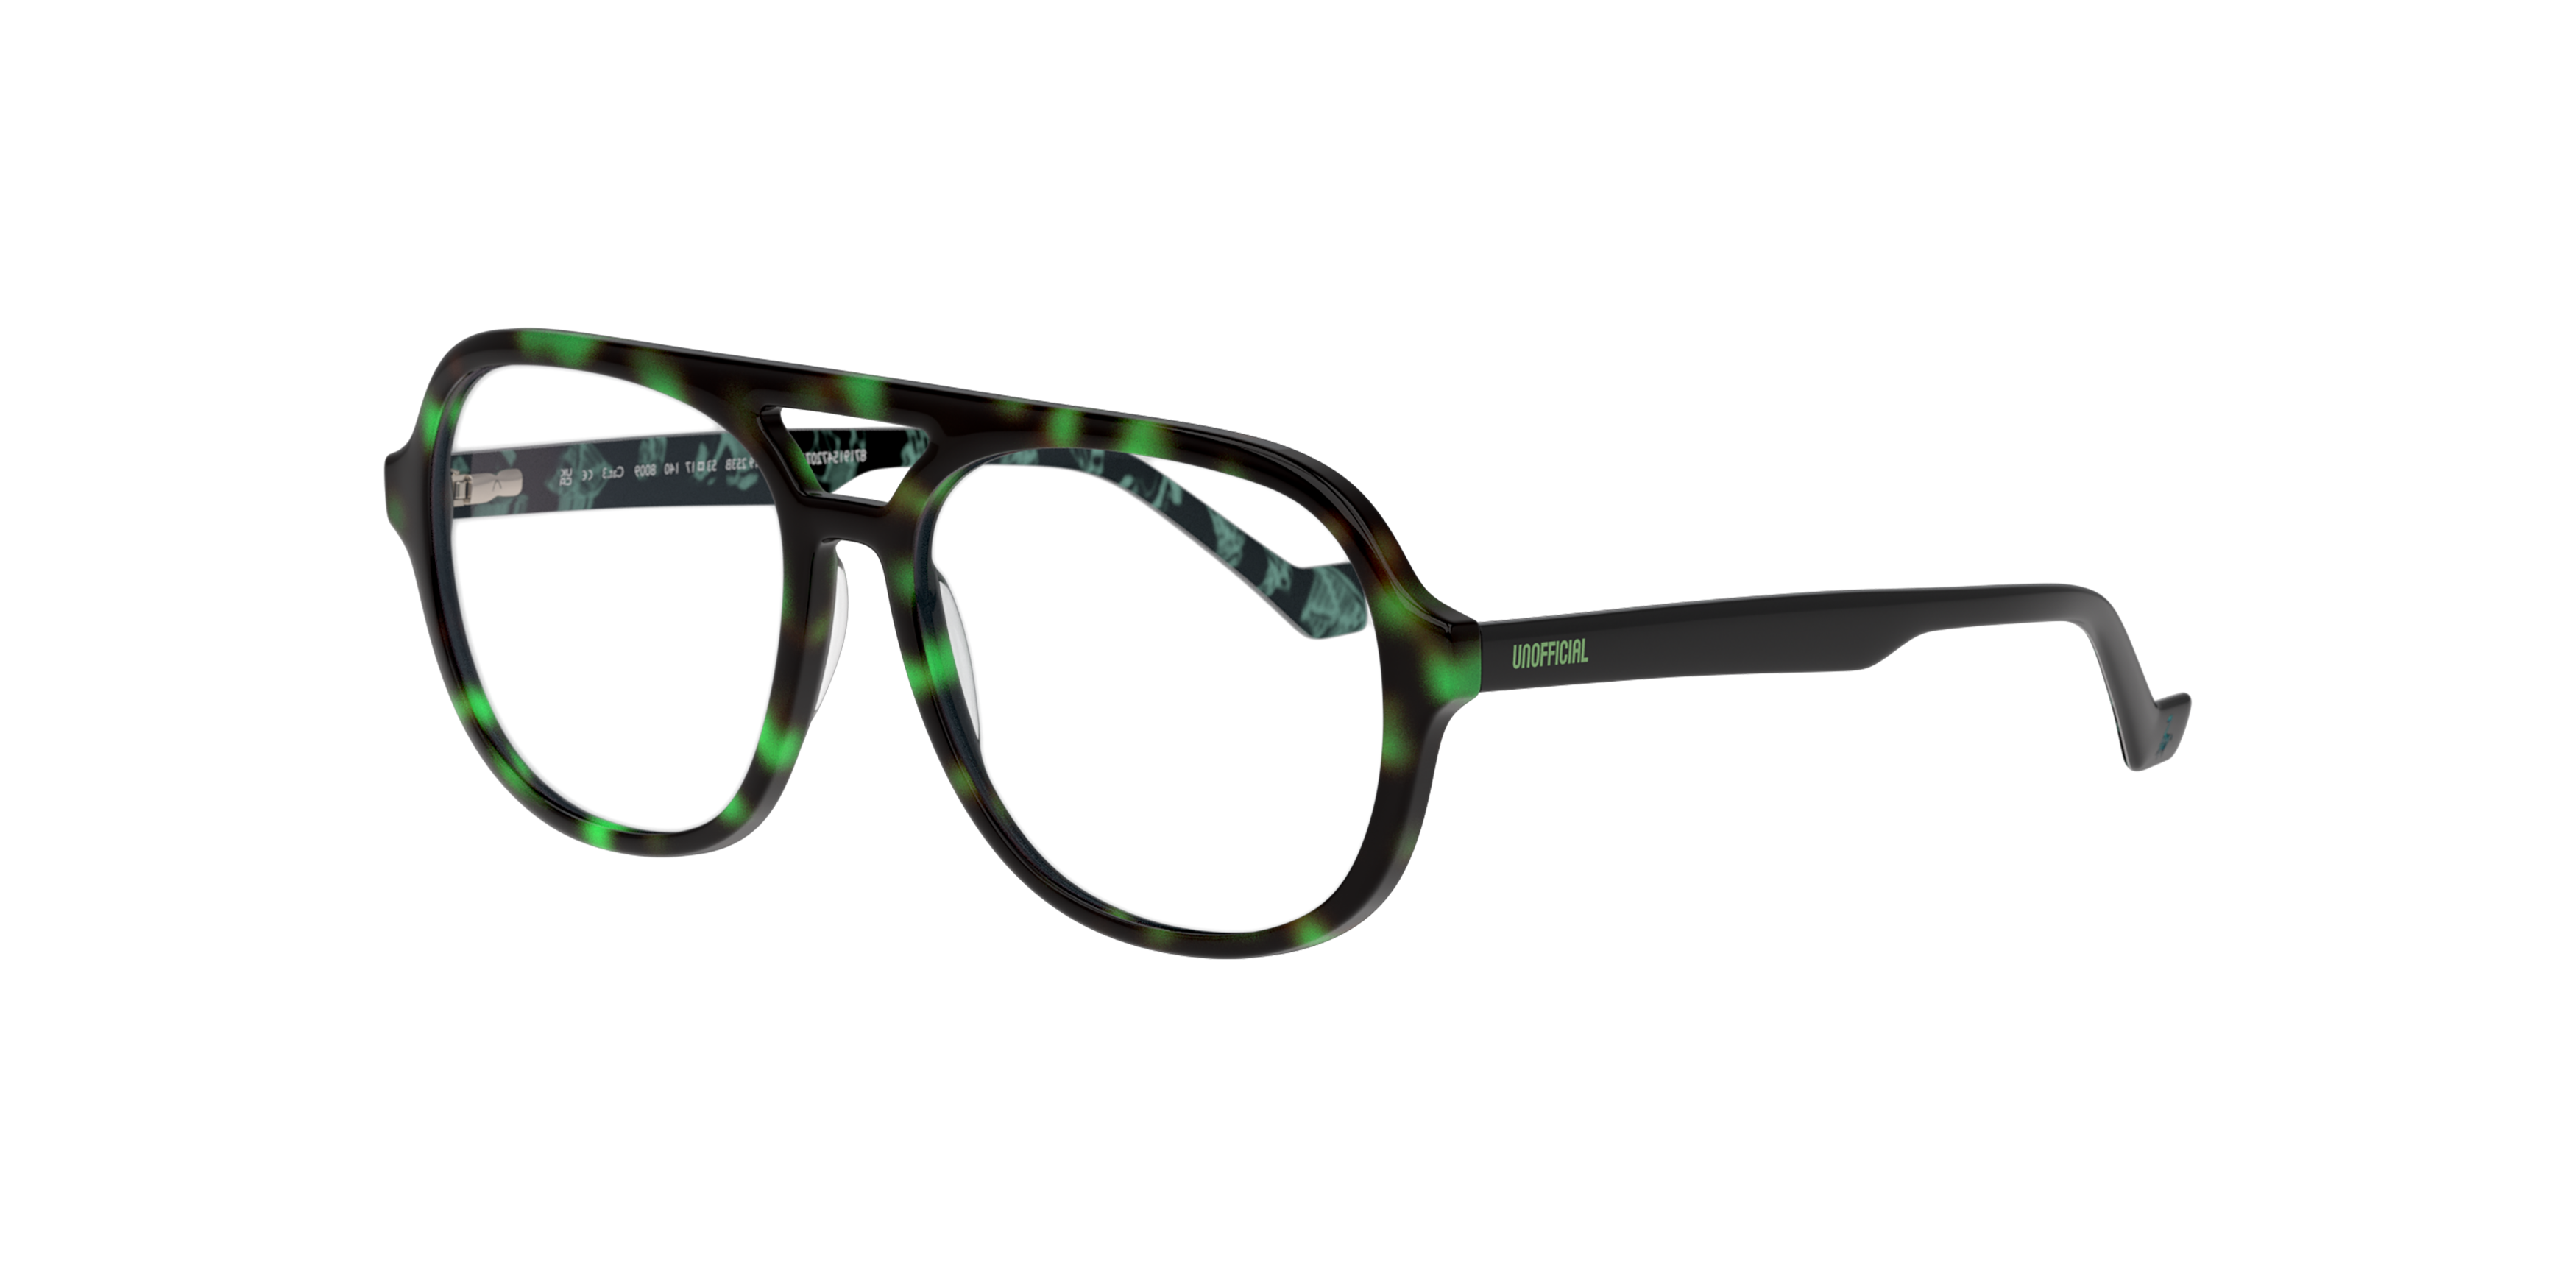 Angle_Left01 Fortnite with Unofficial UNSU0160 Glasses Transparent / Green